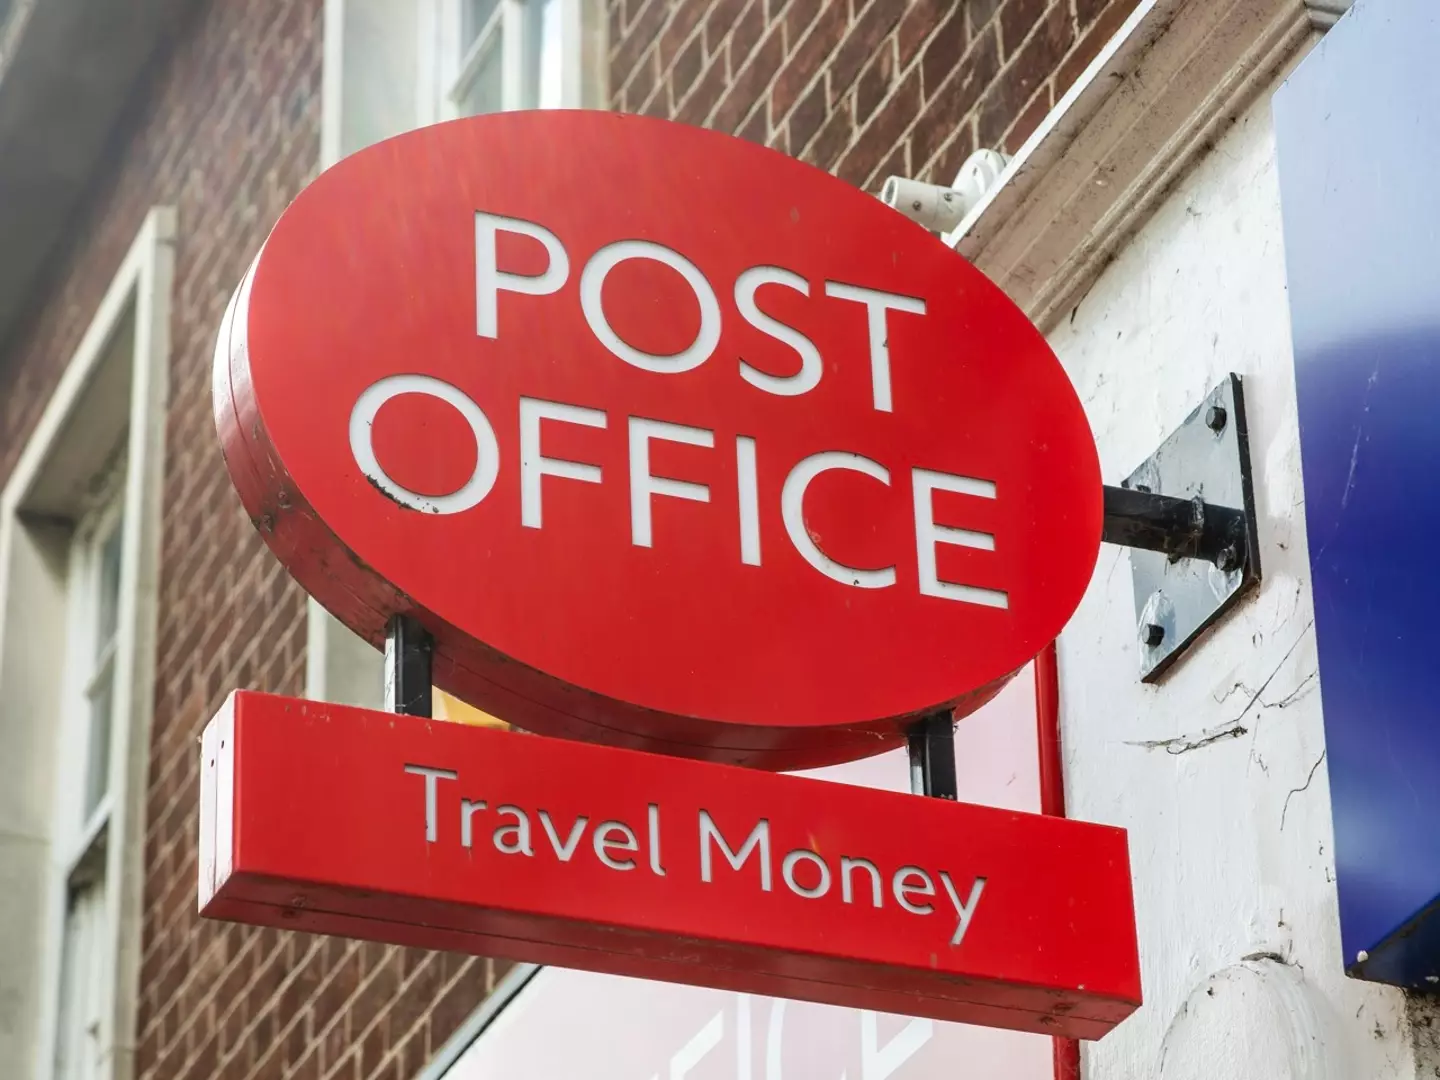 The Post Office is now under investigation by police following the new ITV drama which has exposed a scandal.